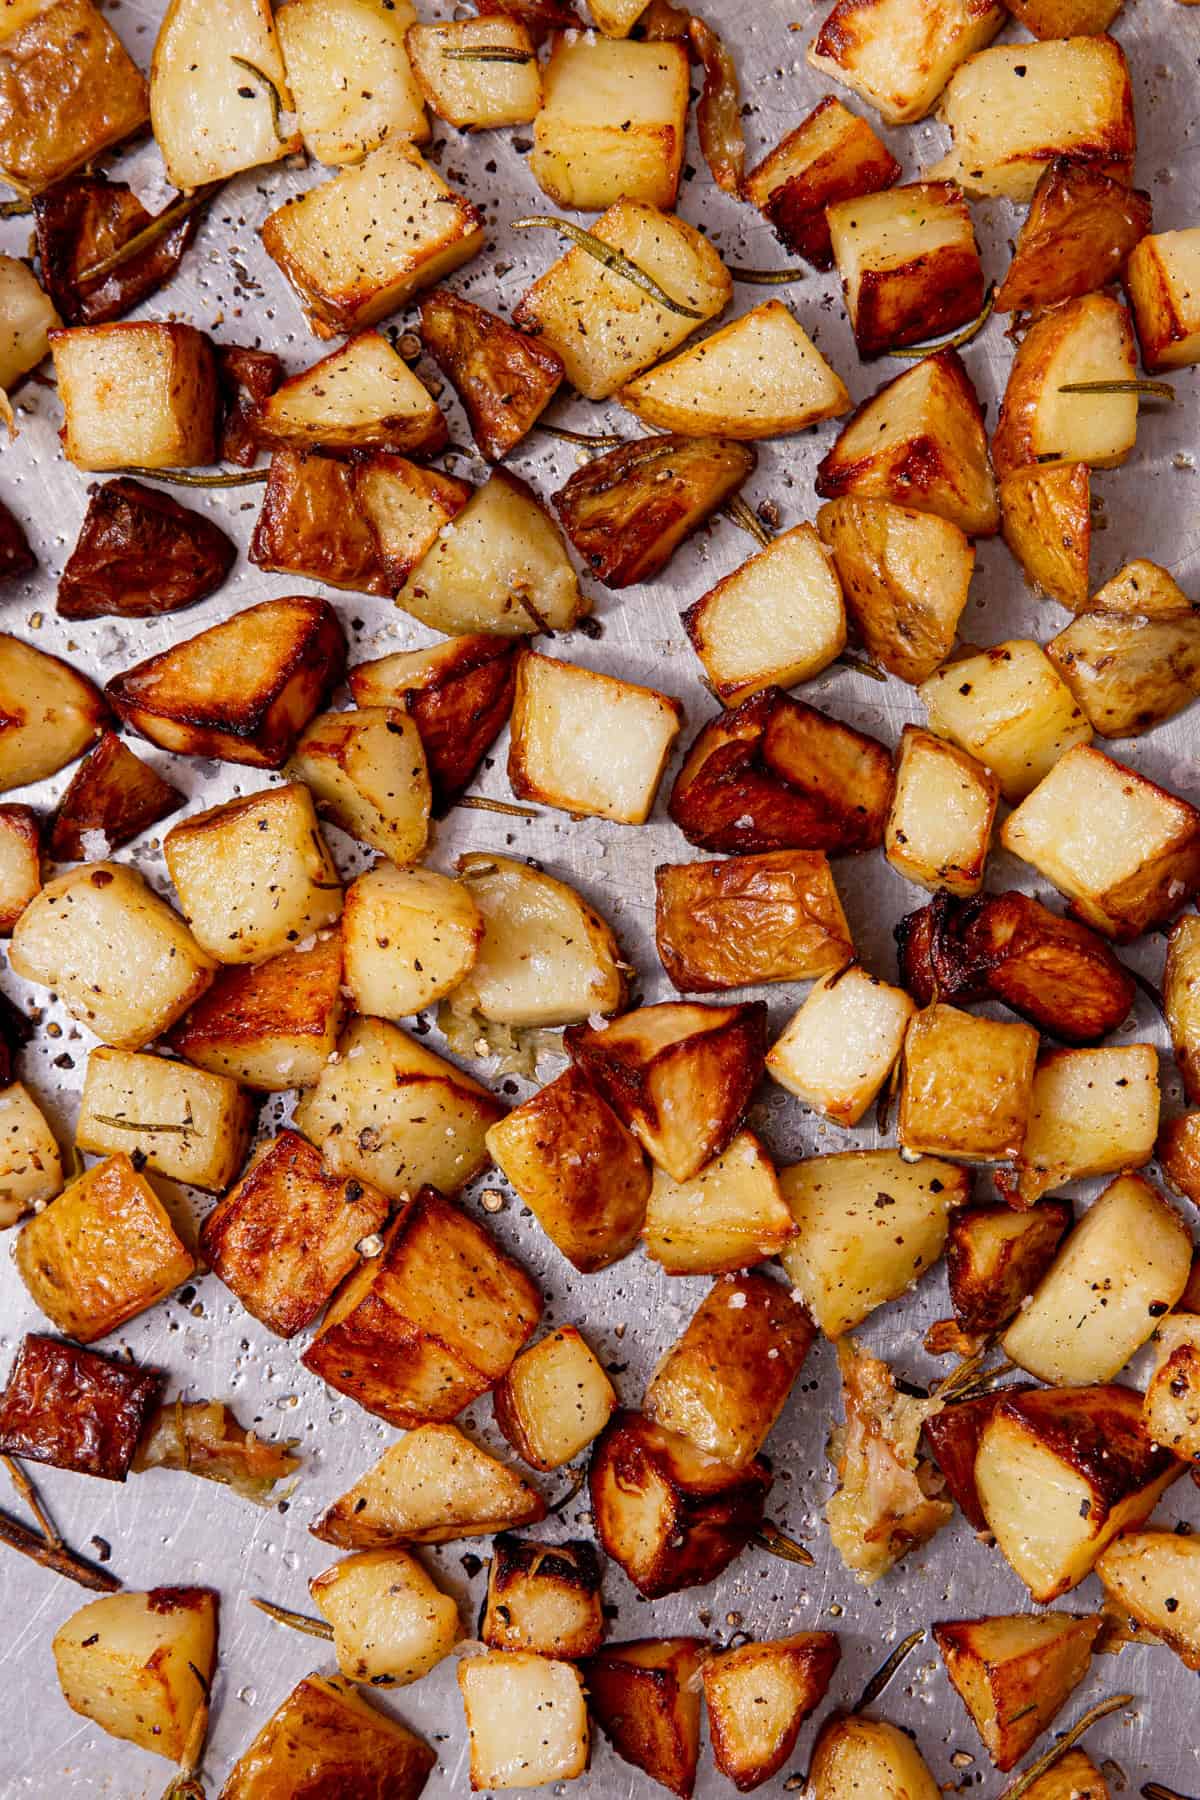 A large stainless steel baking tray filled with with browned, roasted potato cubes with some seasoing and rosemary sprigs.